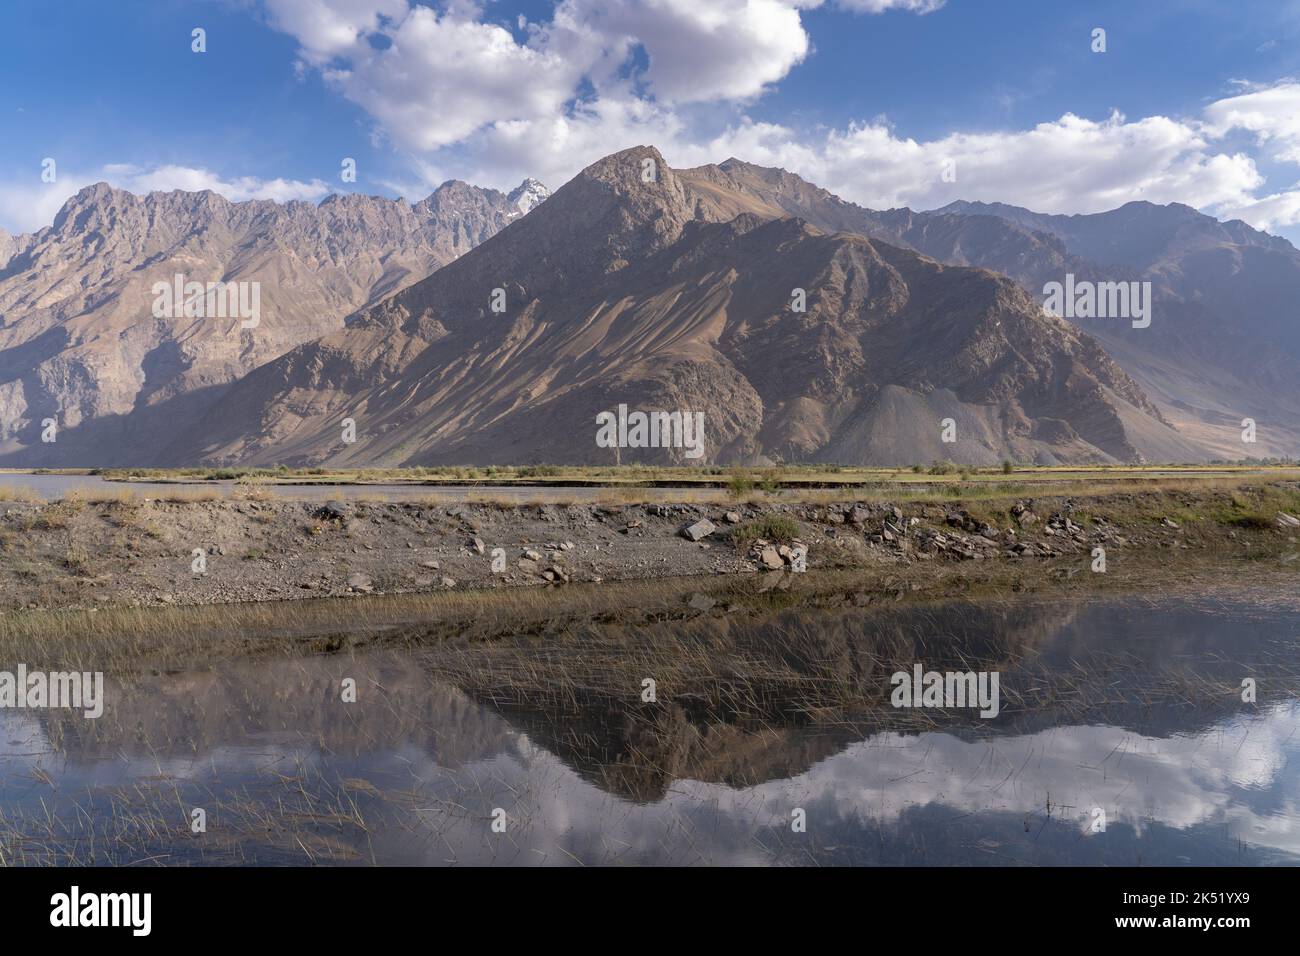 Landscape view of mountains in Afghanistan in the Panj river valley with reflection in water, Rushan, Gorno-Badakshan, Tadjikistan Stock Photo